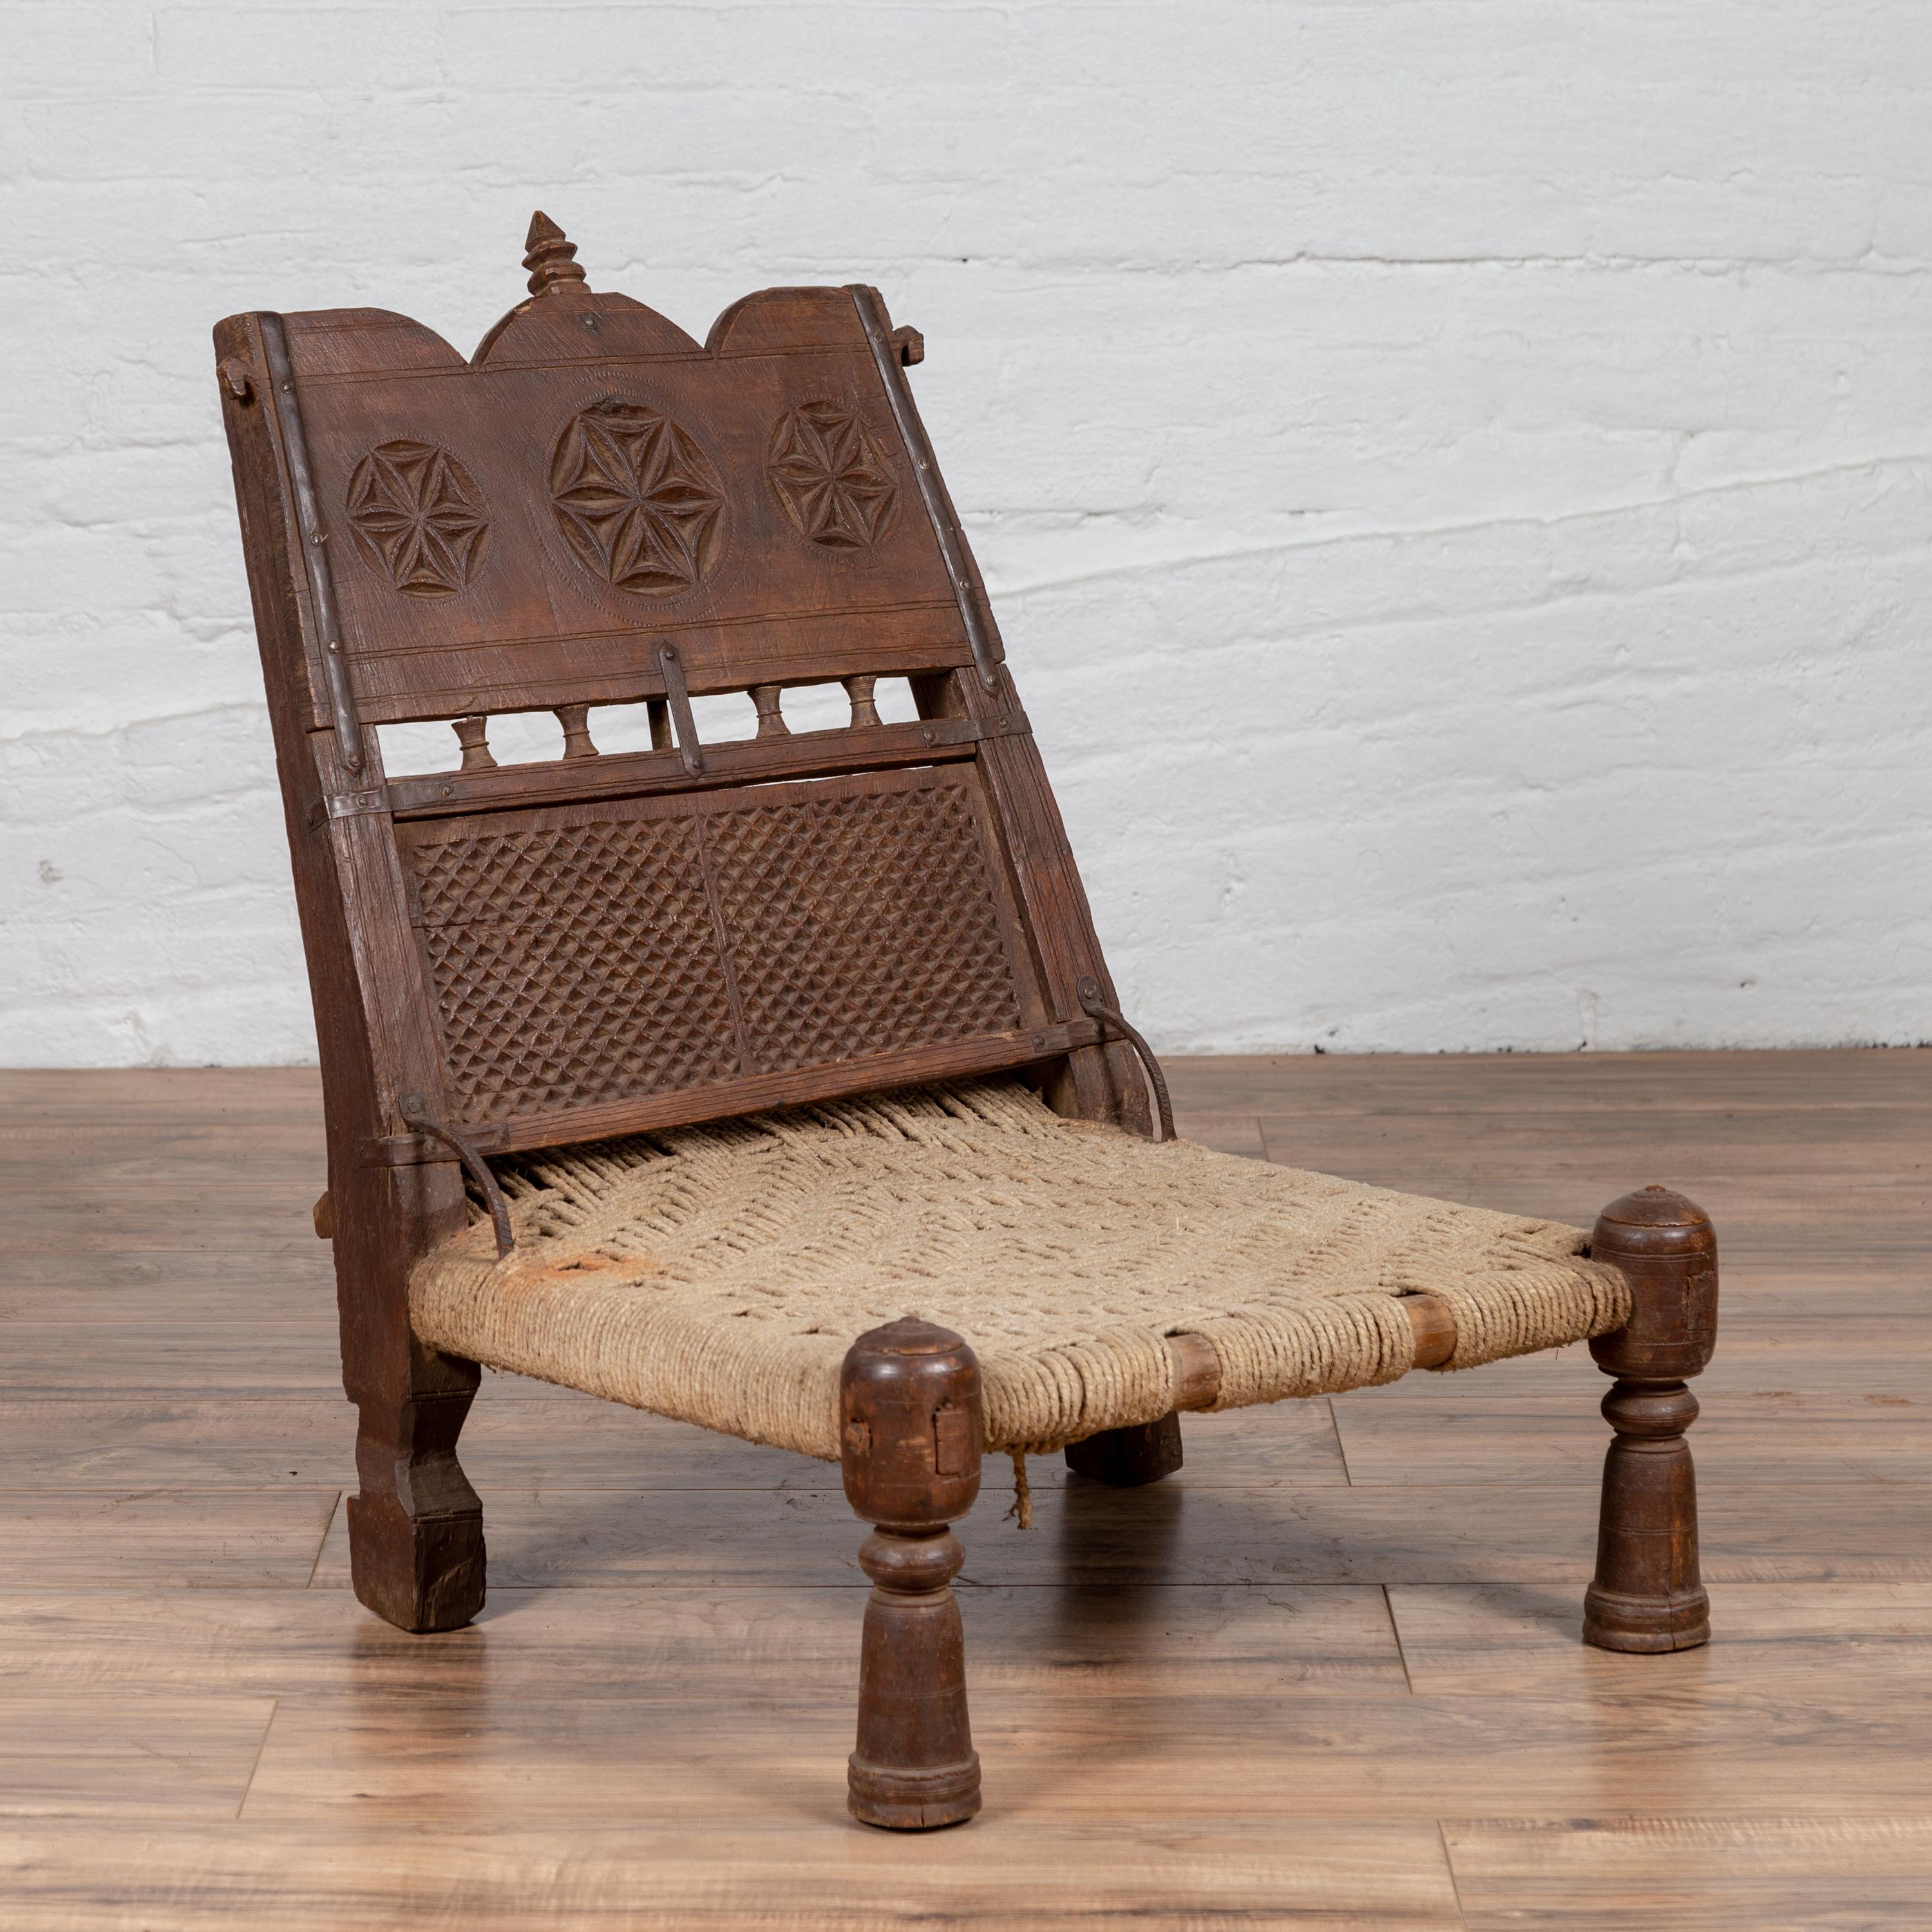 An old Indian rustic wooden low chair from the early 20th century, with hand-woven twine and carved motifs. Charming our eyes with its rustic appearance, this low seat wooden chair features a short slanted back topped with a small finial, and